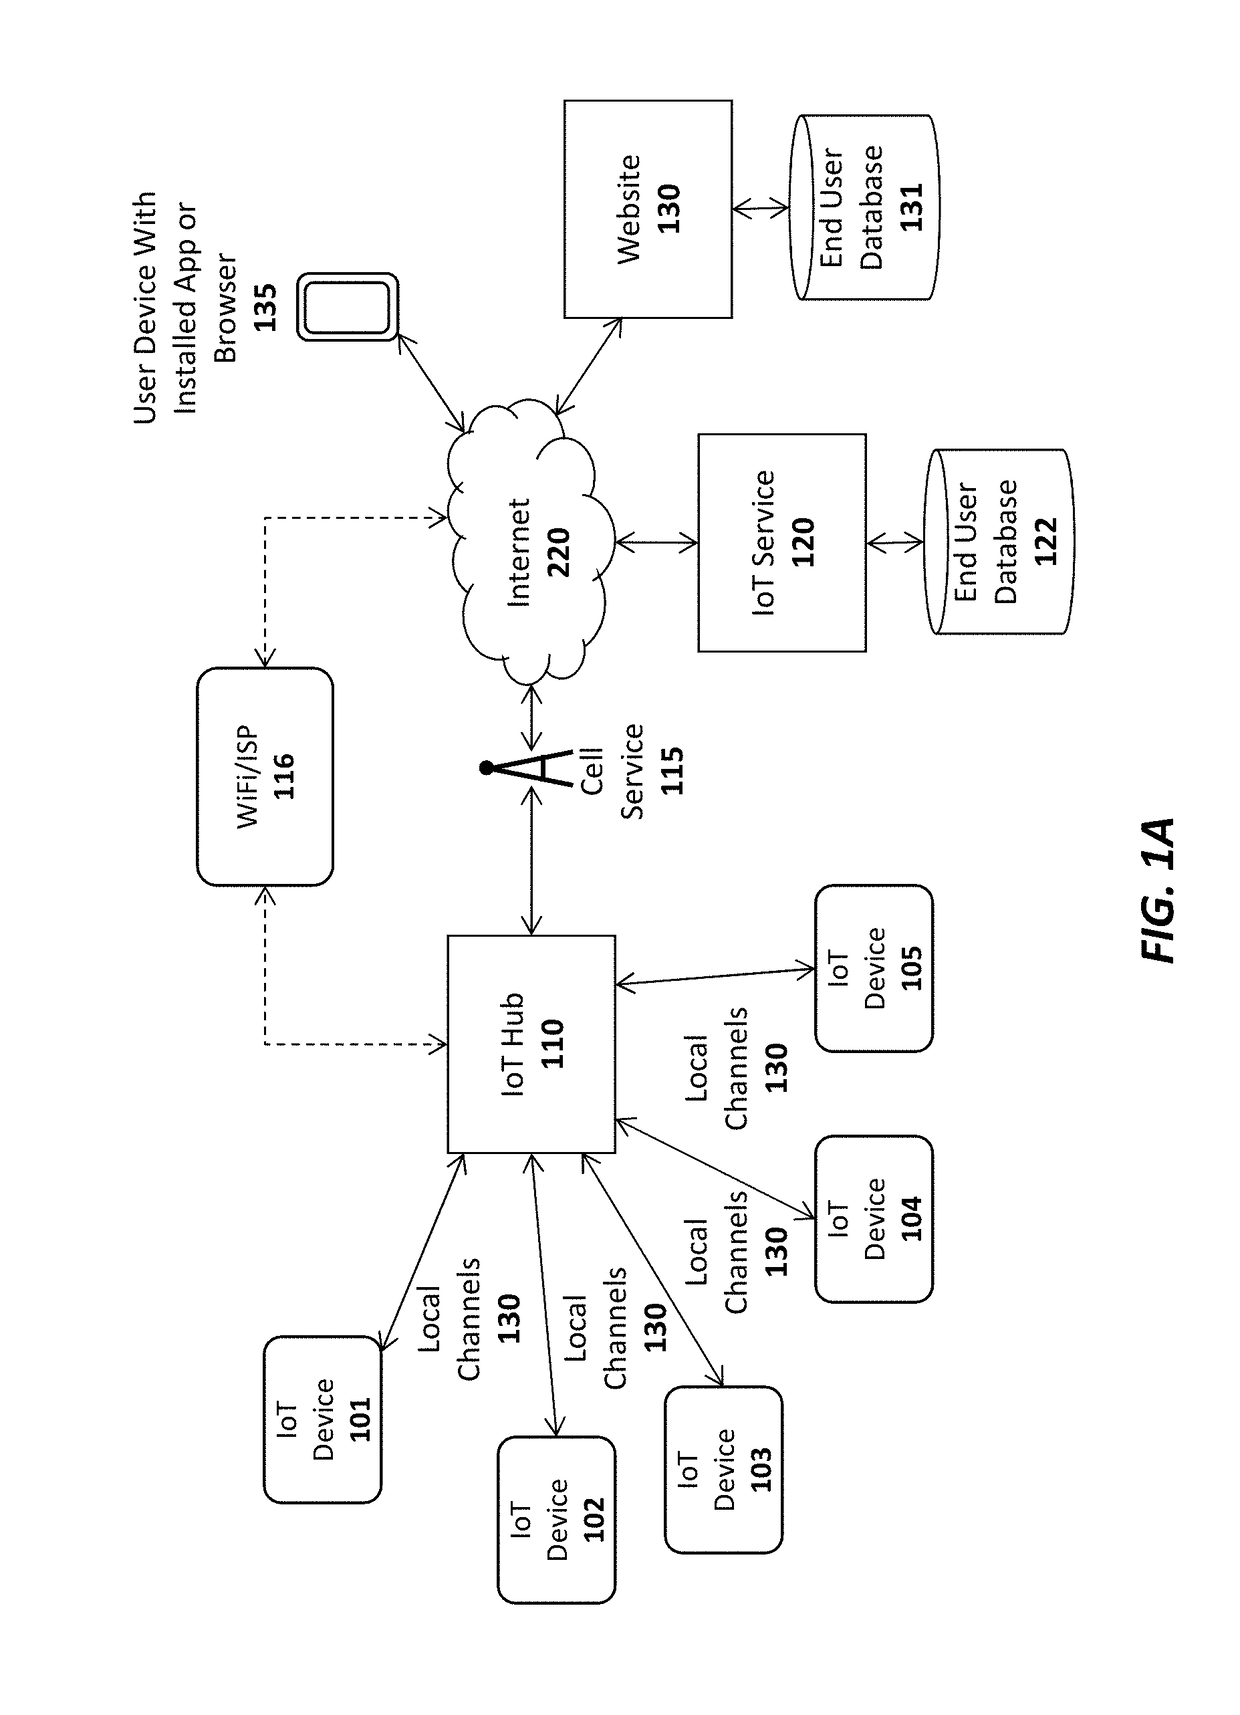 System and method for automatic wireless network authentication in an internet of things (IOT) system